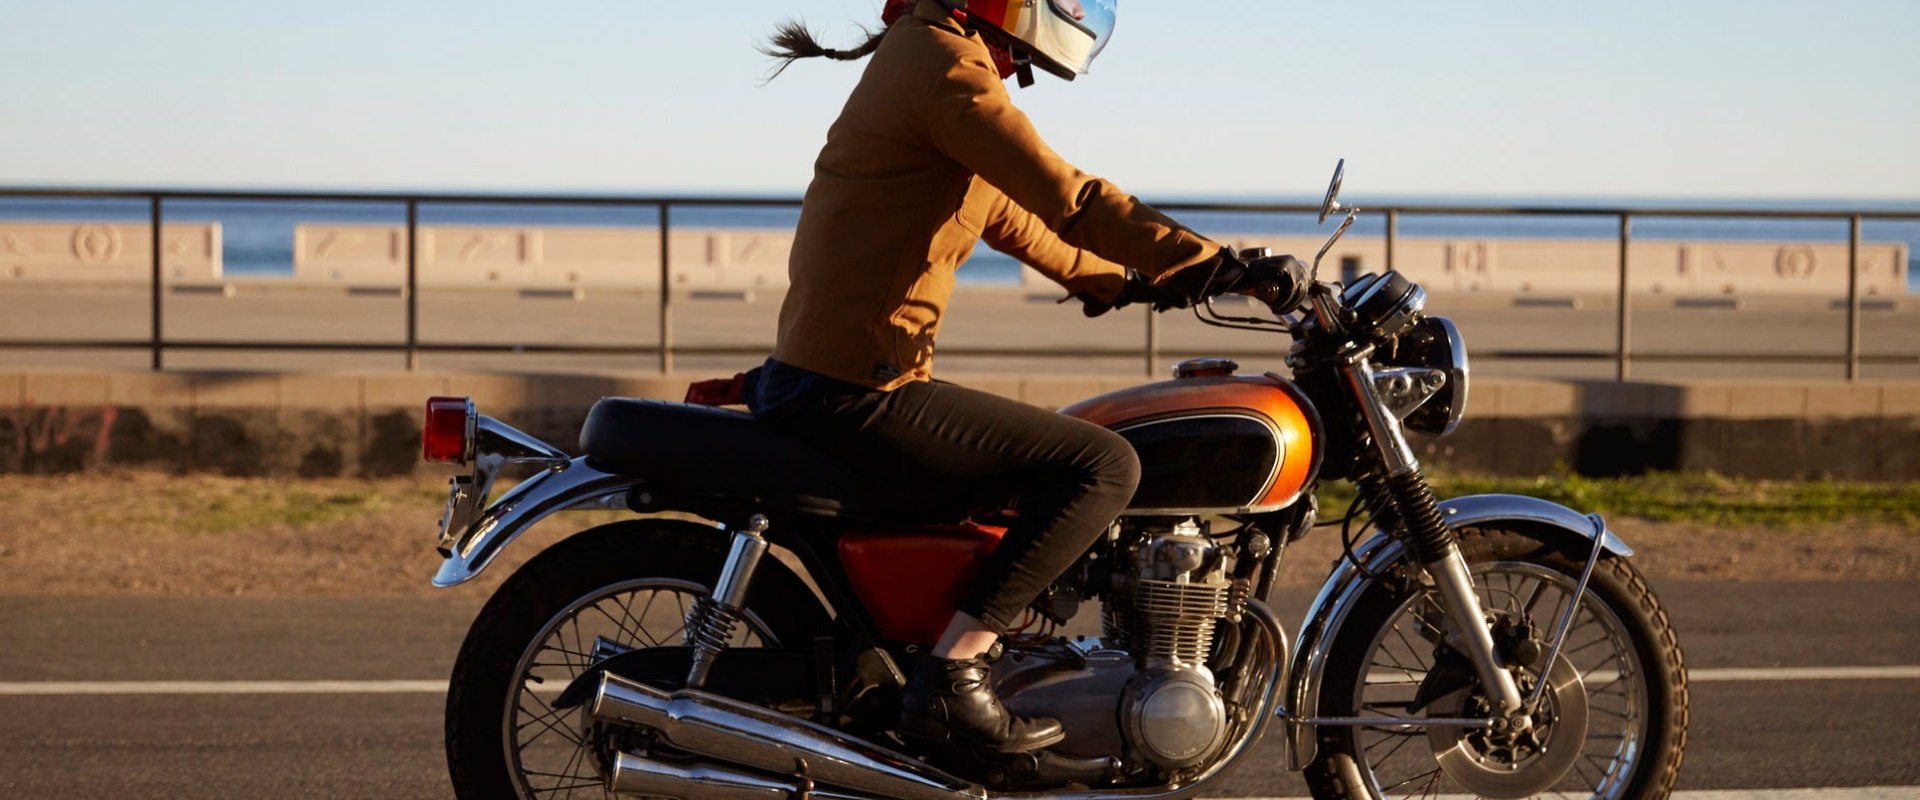 Affordable Theft Insurance for Motorcycles